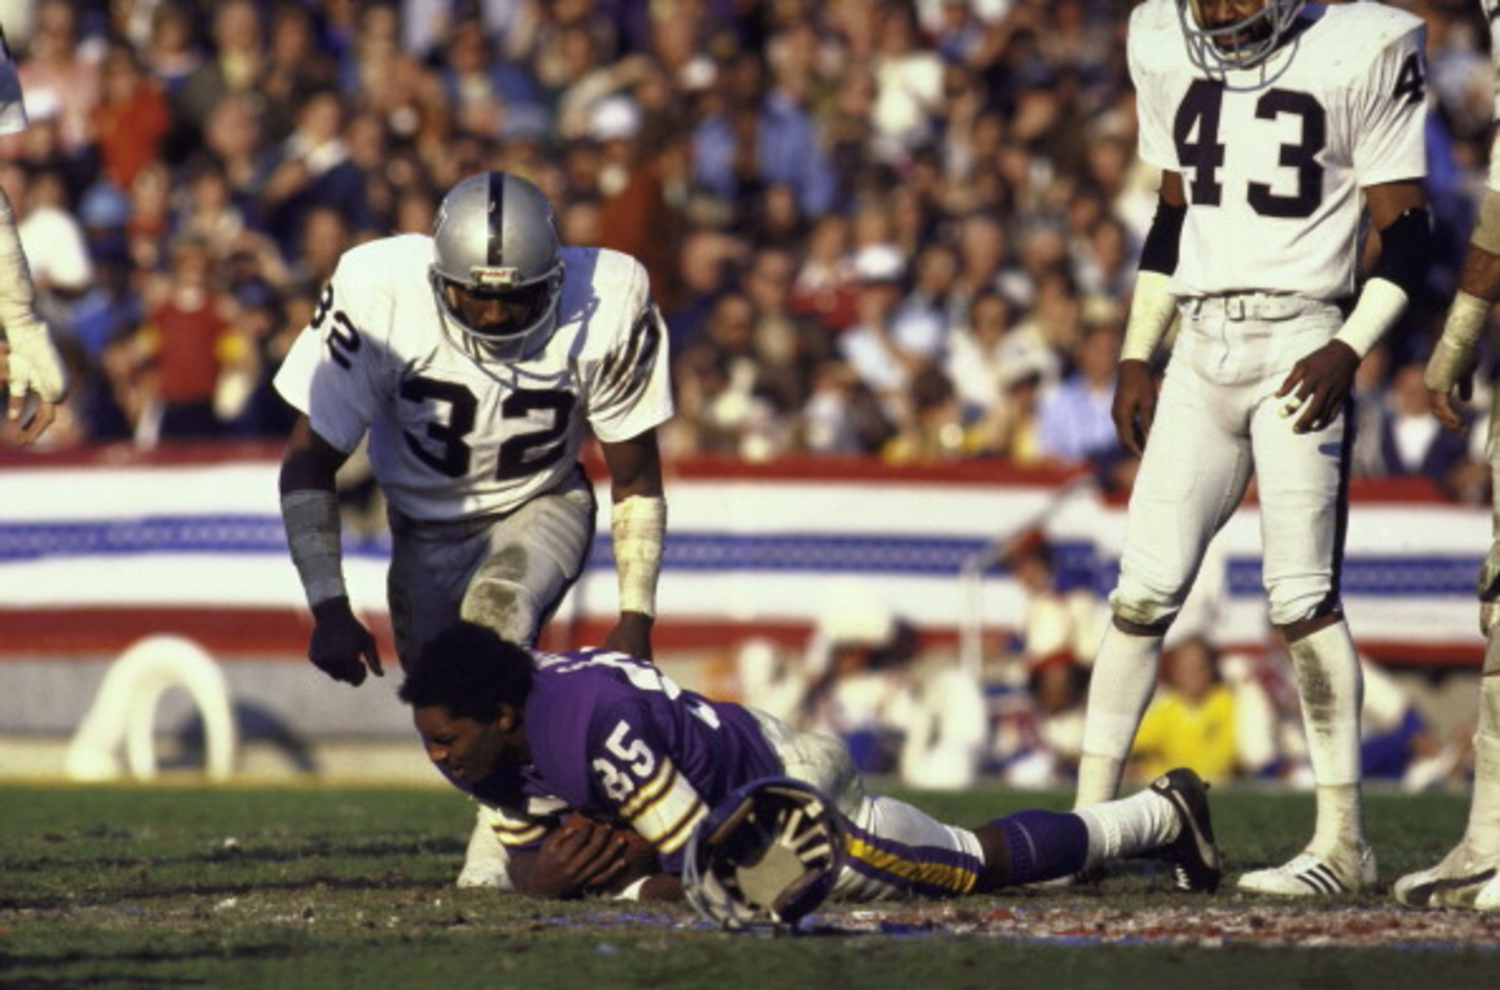 The Tragic Death of Oakland Raiders Great and Hard-Hitting Safety